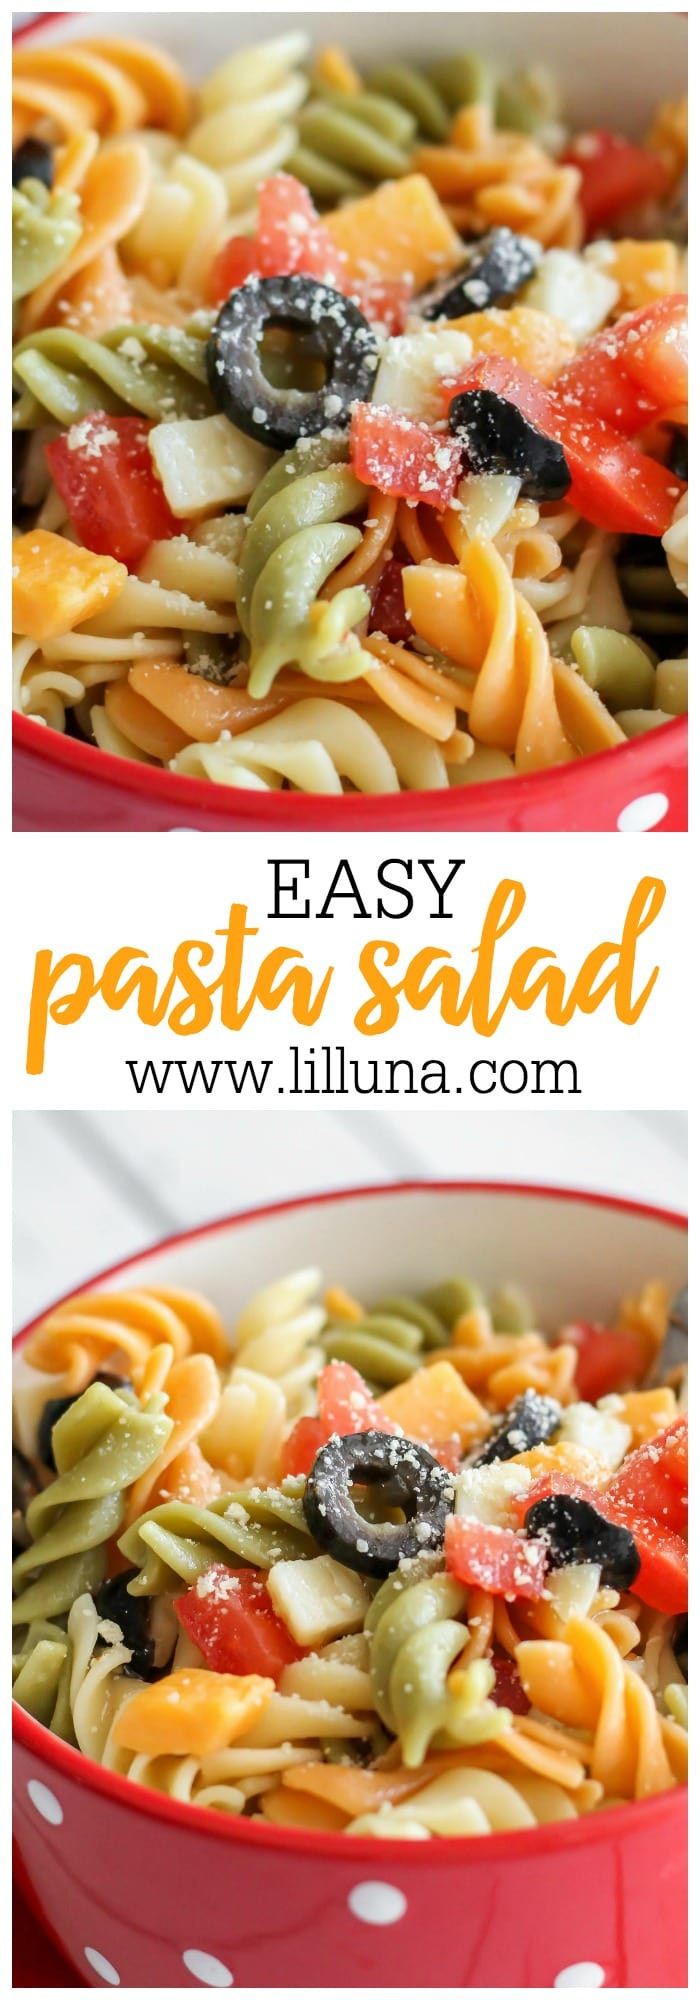 Easy Pasta Salad Recipes
 Easy Pasta Salad Recipe with Italian Dressing VIDEO